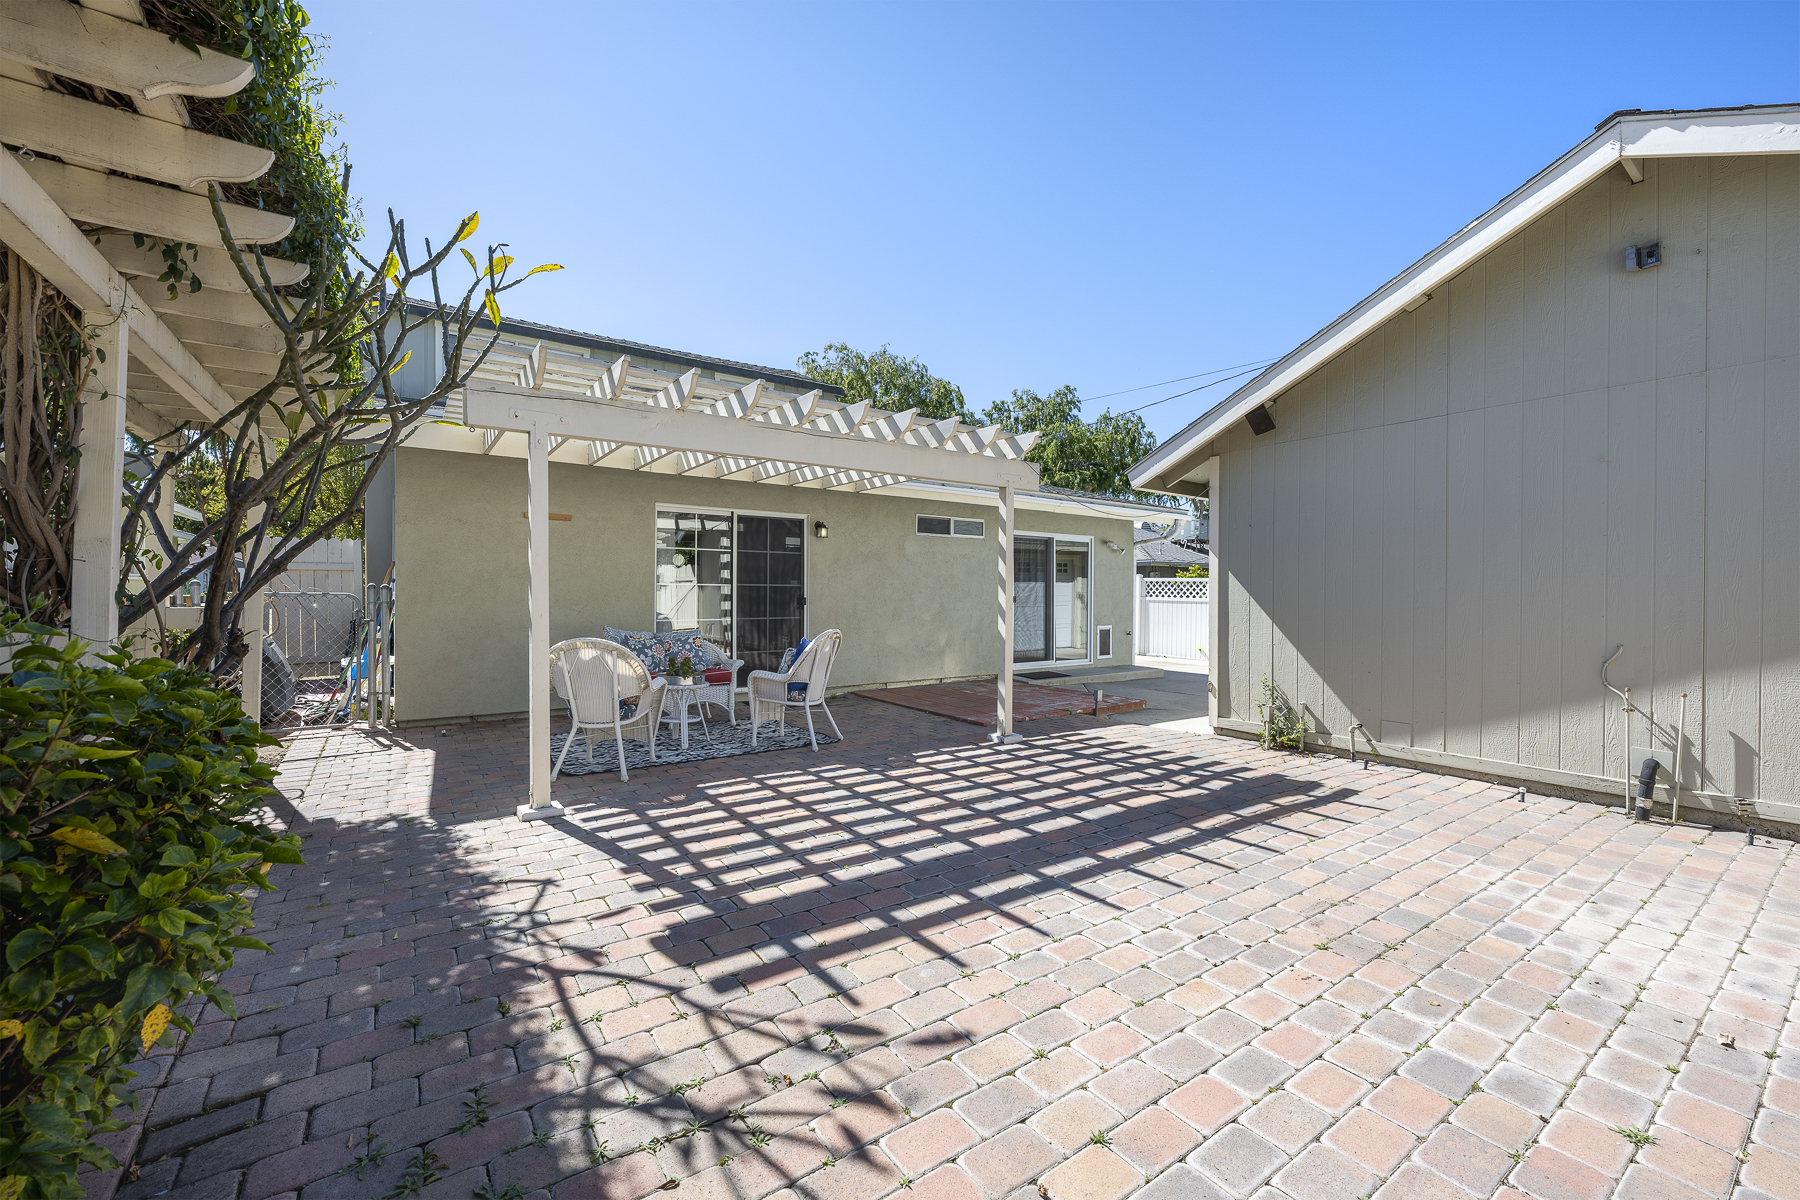 1229 Grove Place Fullerton CA 92831: Courtyard with pergola and rear of home with fence on the left